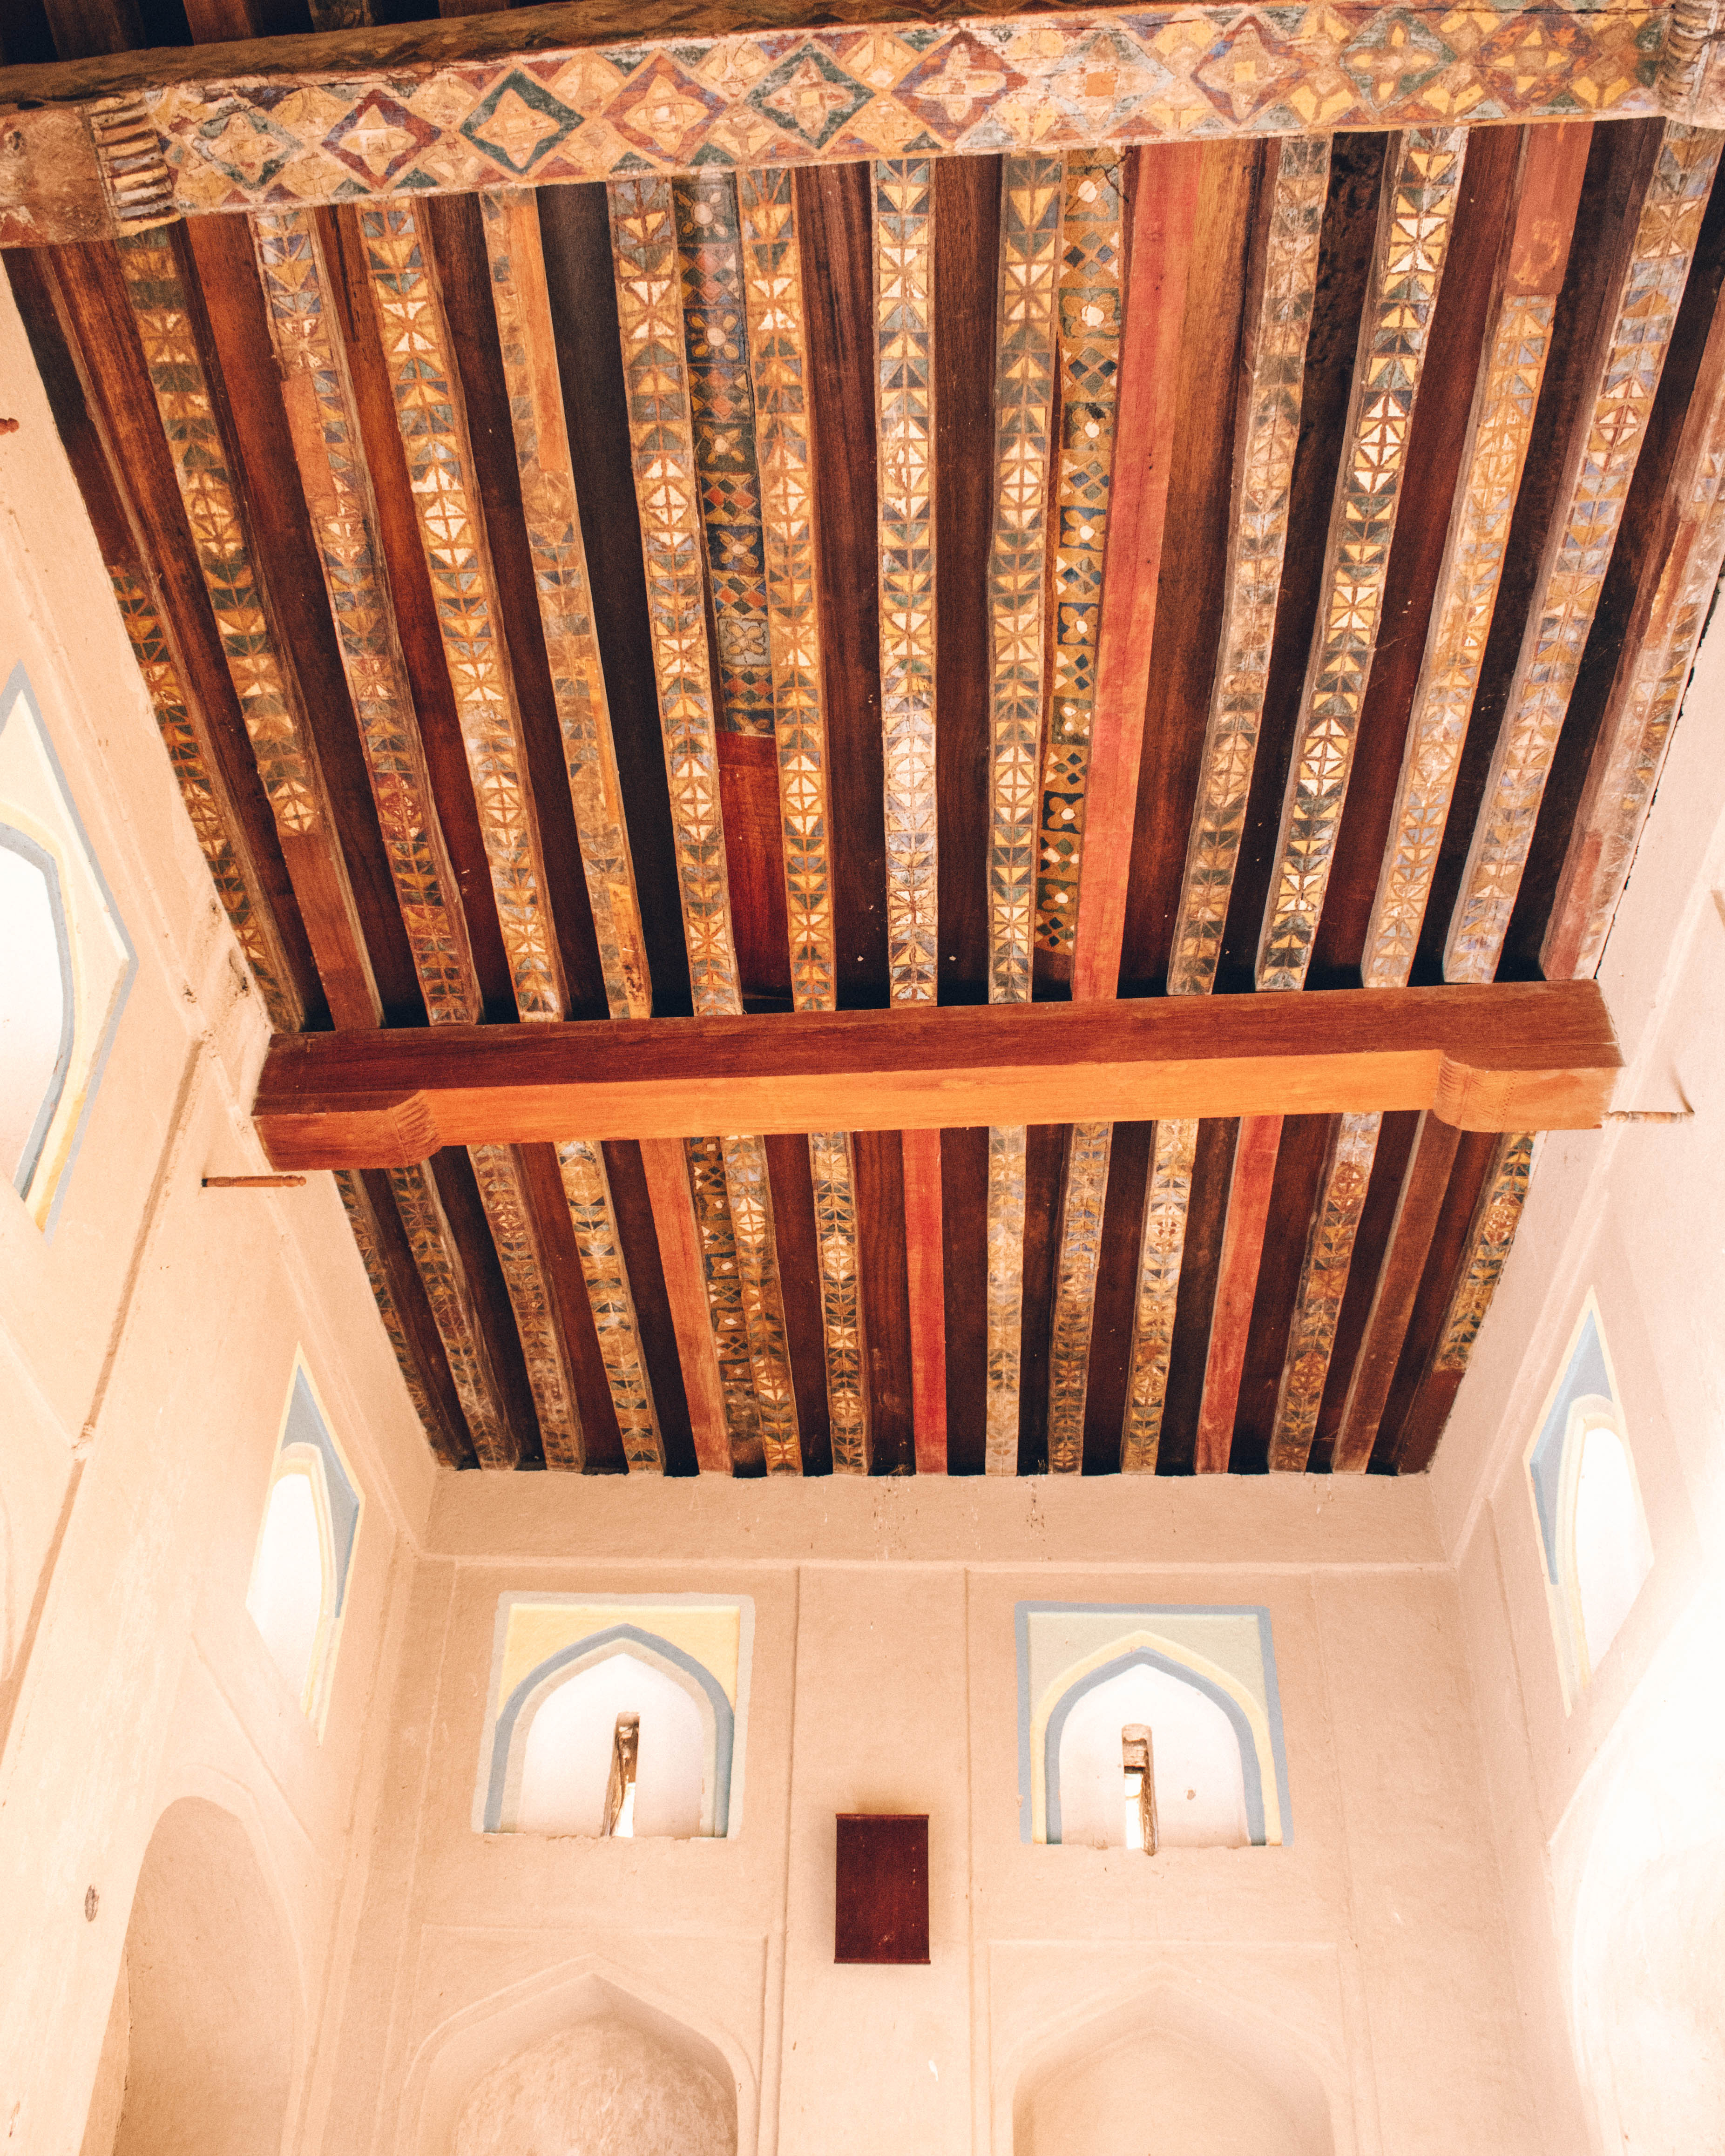 Intricately painted ceiling beams in Bahla Fort